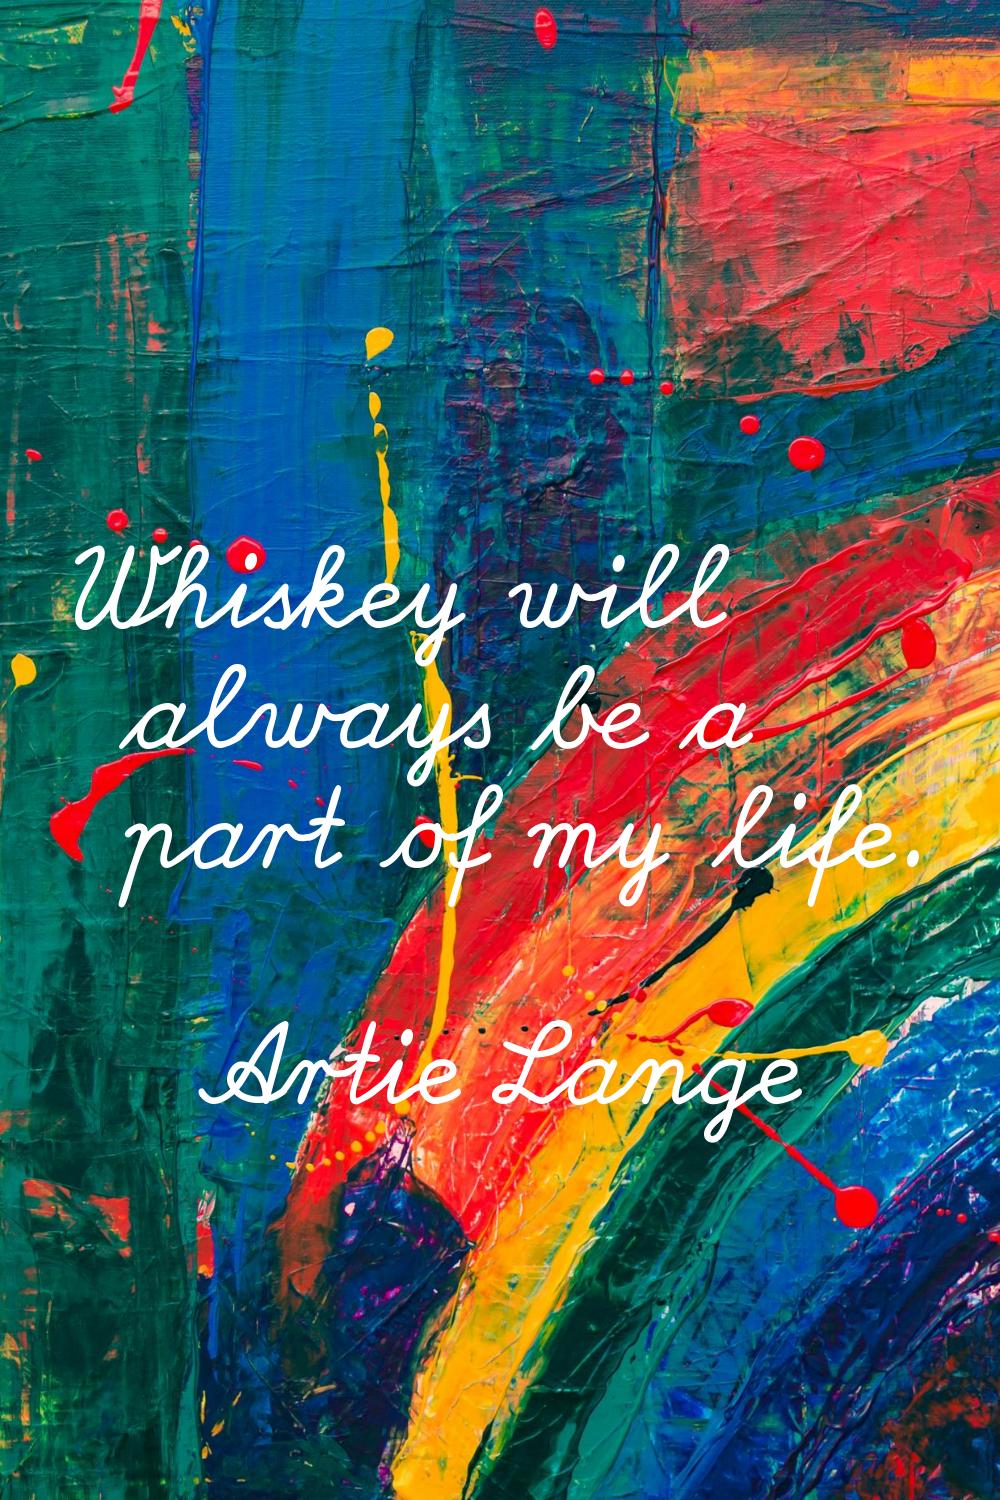 Whiskey will always be a part of my life.